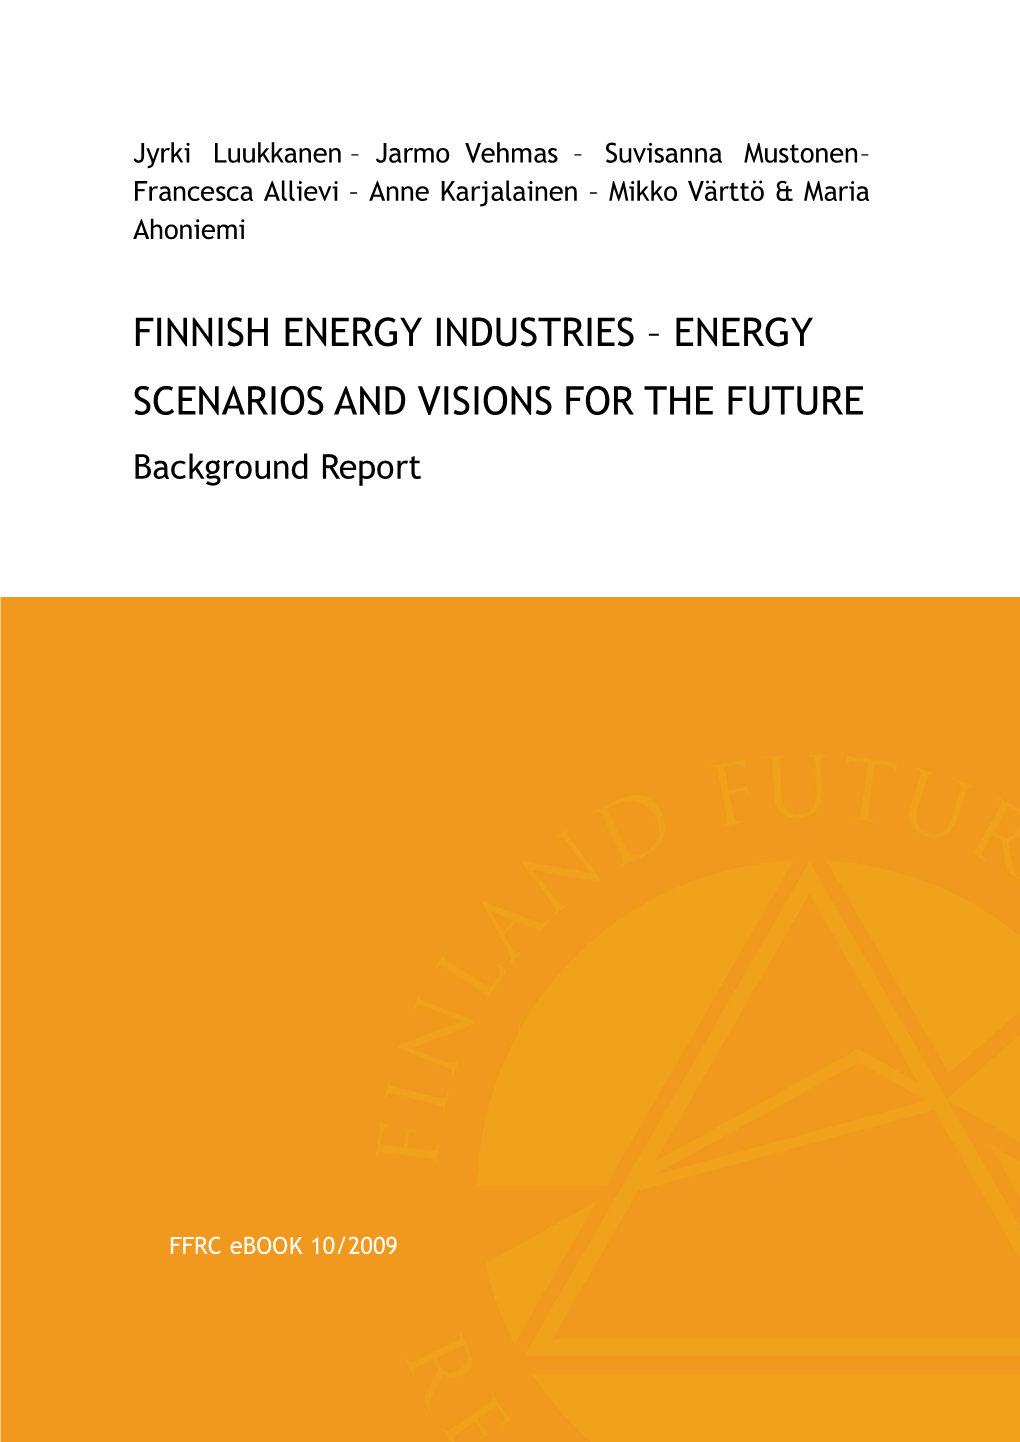 FINNISH ENERGY INDUSTRIES – ENERGY SCENARIOS and VISIONS for the FUTURE Background Report